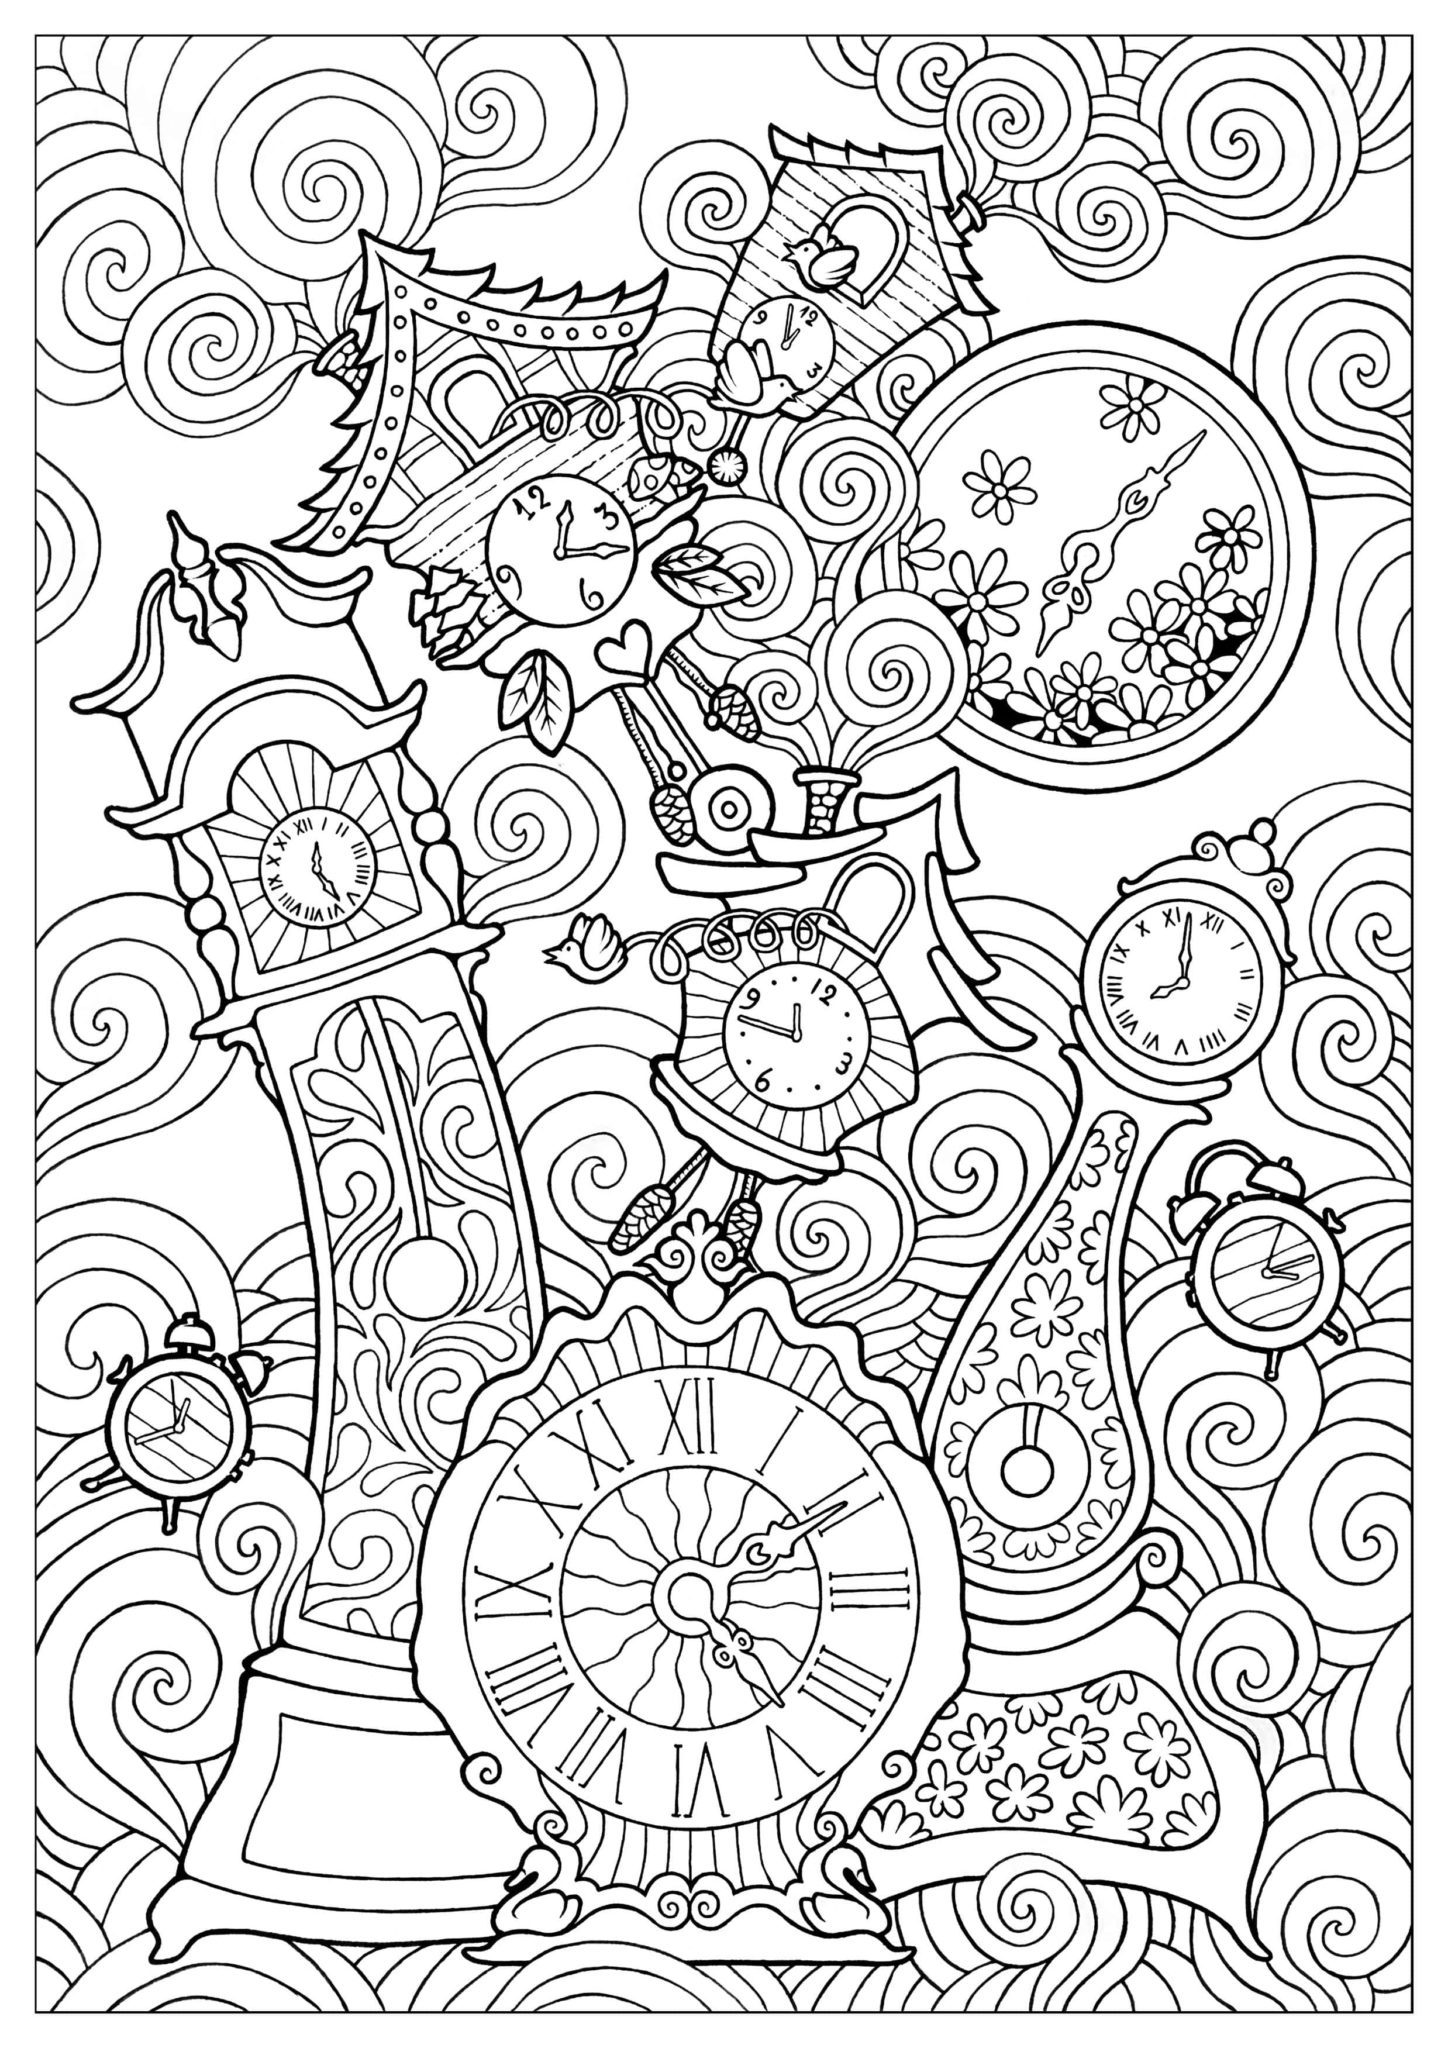 35 Adult Coloring Pages That Are Printable and Fun - Happier Human